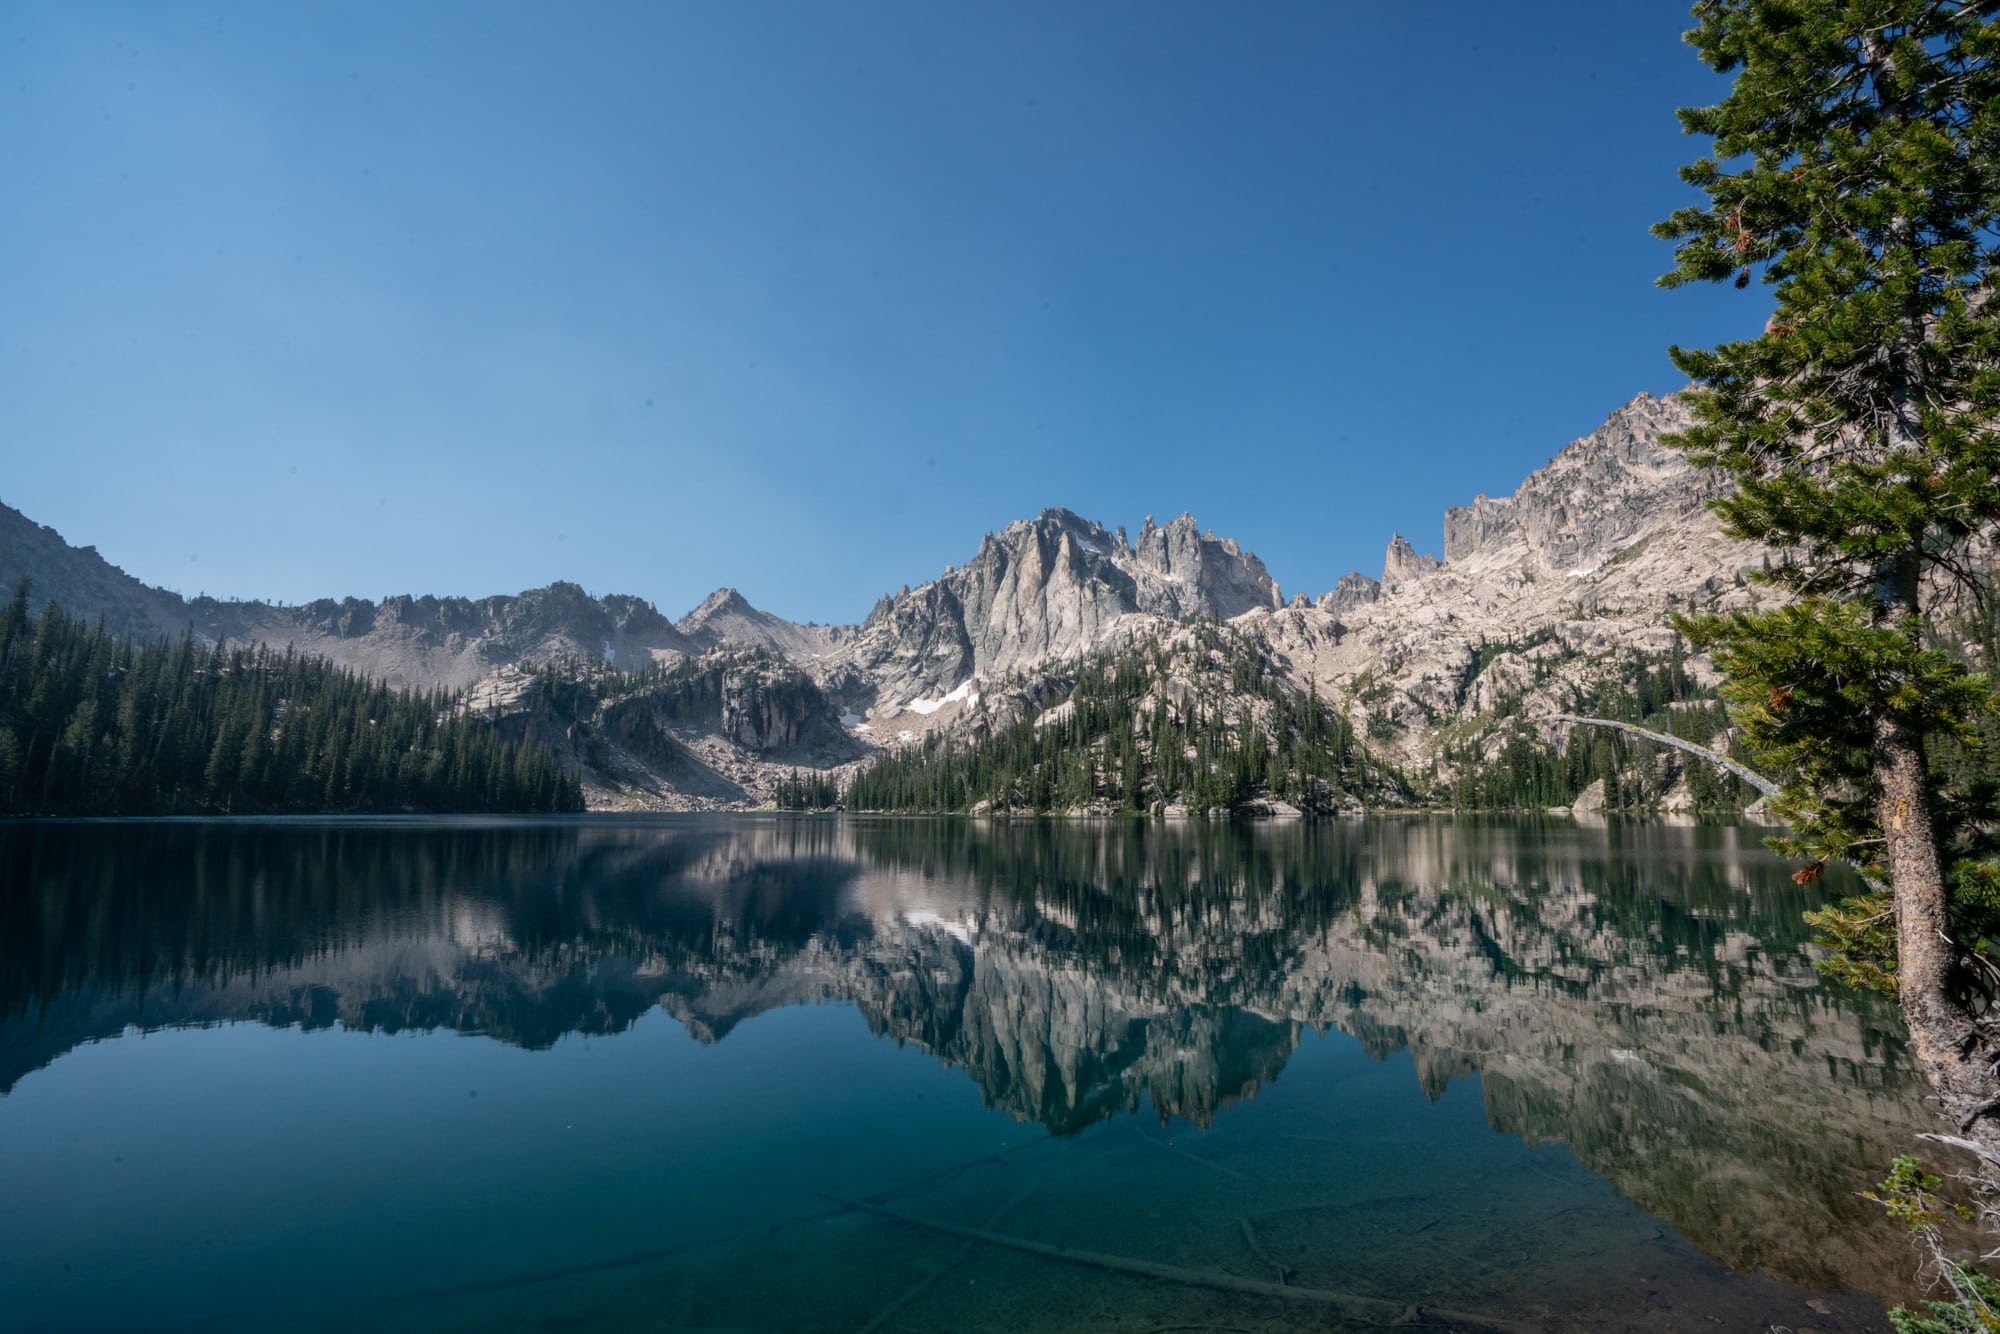 Baron Lakes is one of those iconic hikes in Idaho's Sawtooth Mountains with several high alpine lakes to choose from and wide open views of the jagged Sawtooth Range.  Get my trail and campsite tips with this detailed Baron Lakes backpacking guide.